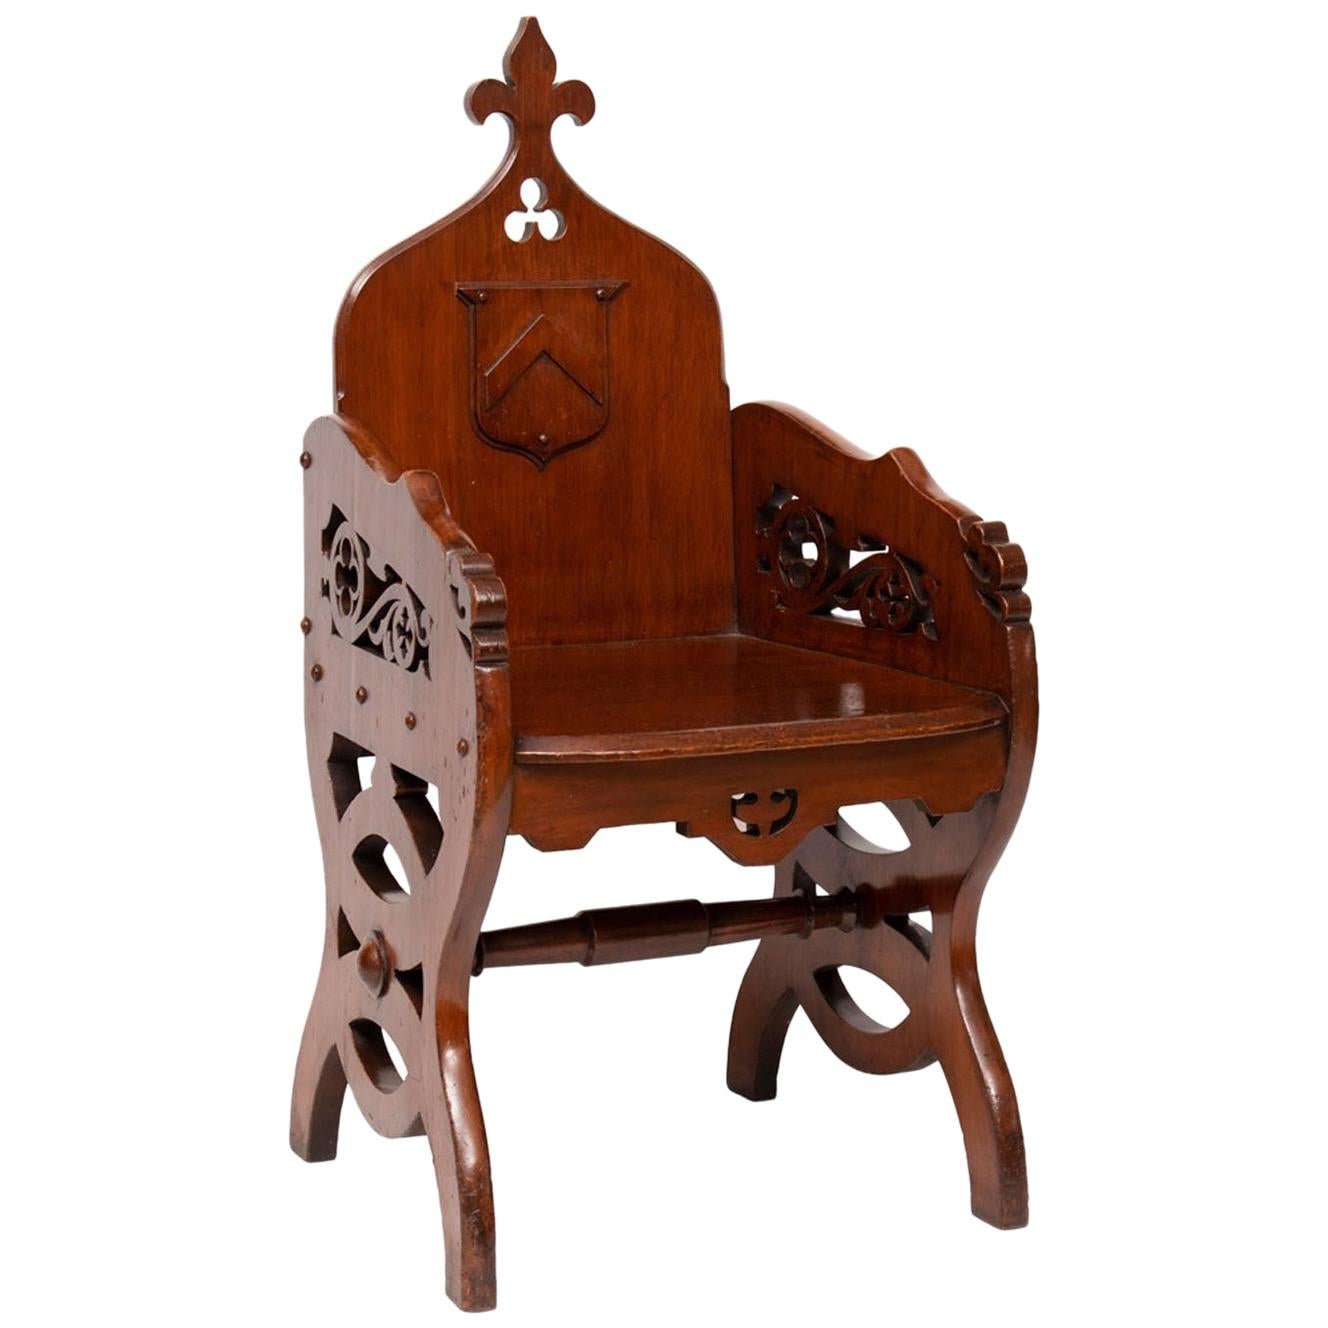 19th Century Ecclesiastical Gothic Revival Priests' Chair